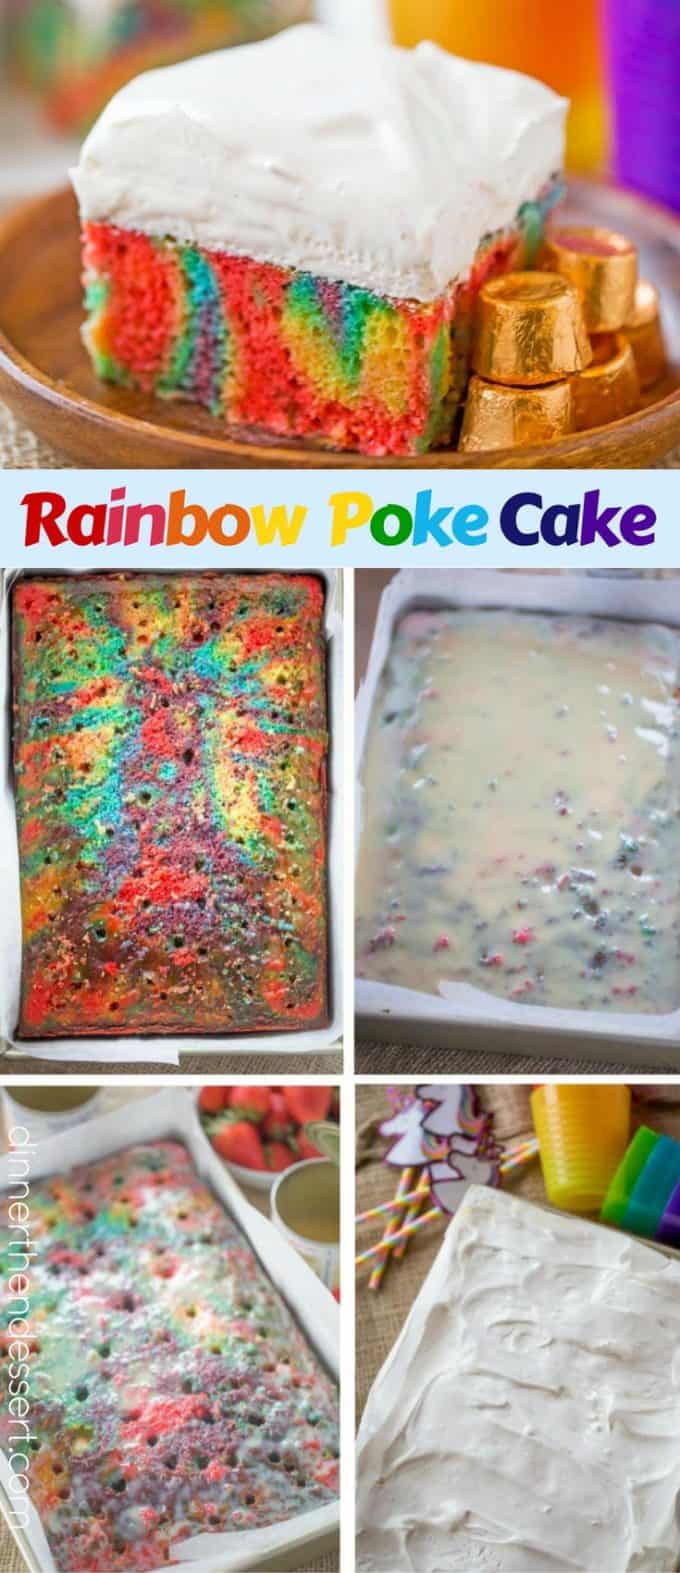 Rainbow Poke Cake With Whipped Cream made with no cake mix. Condensed milk makes this poke cake super moist and fluffy stabilized whipped cream won't melt!